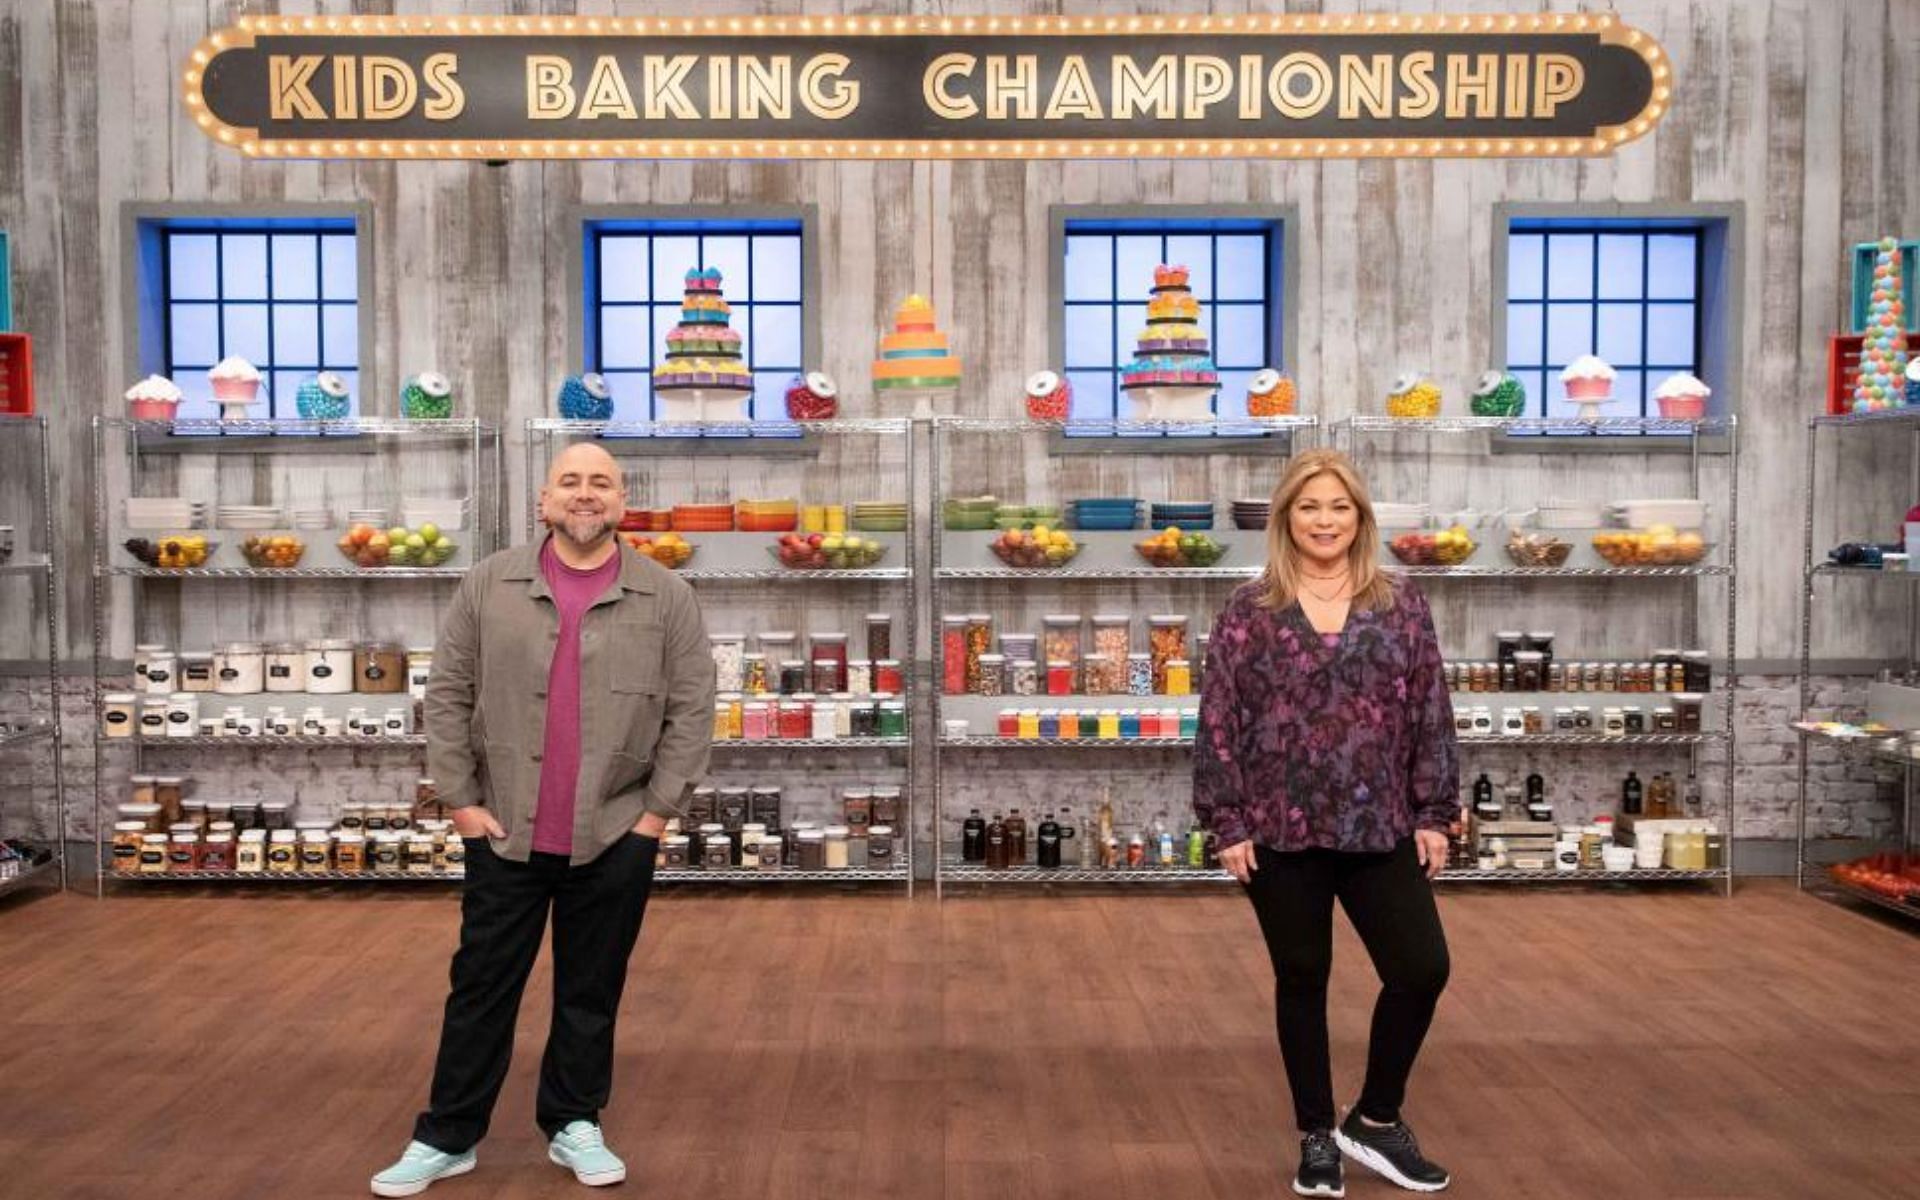 Duff Goldman and Valerie Bertinelli have been hosting Kids Baking Championship for the past 10 seasons (Image via Rob Pryce/ Food Network)